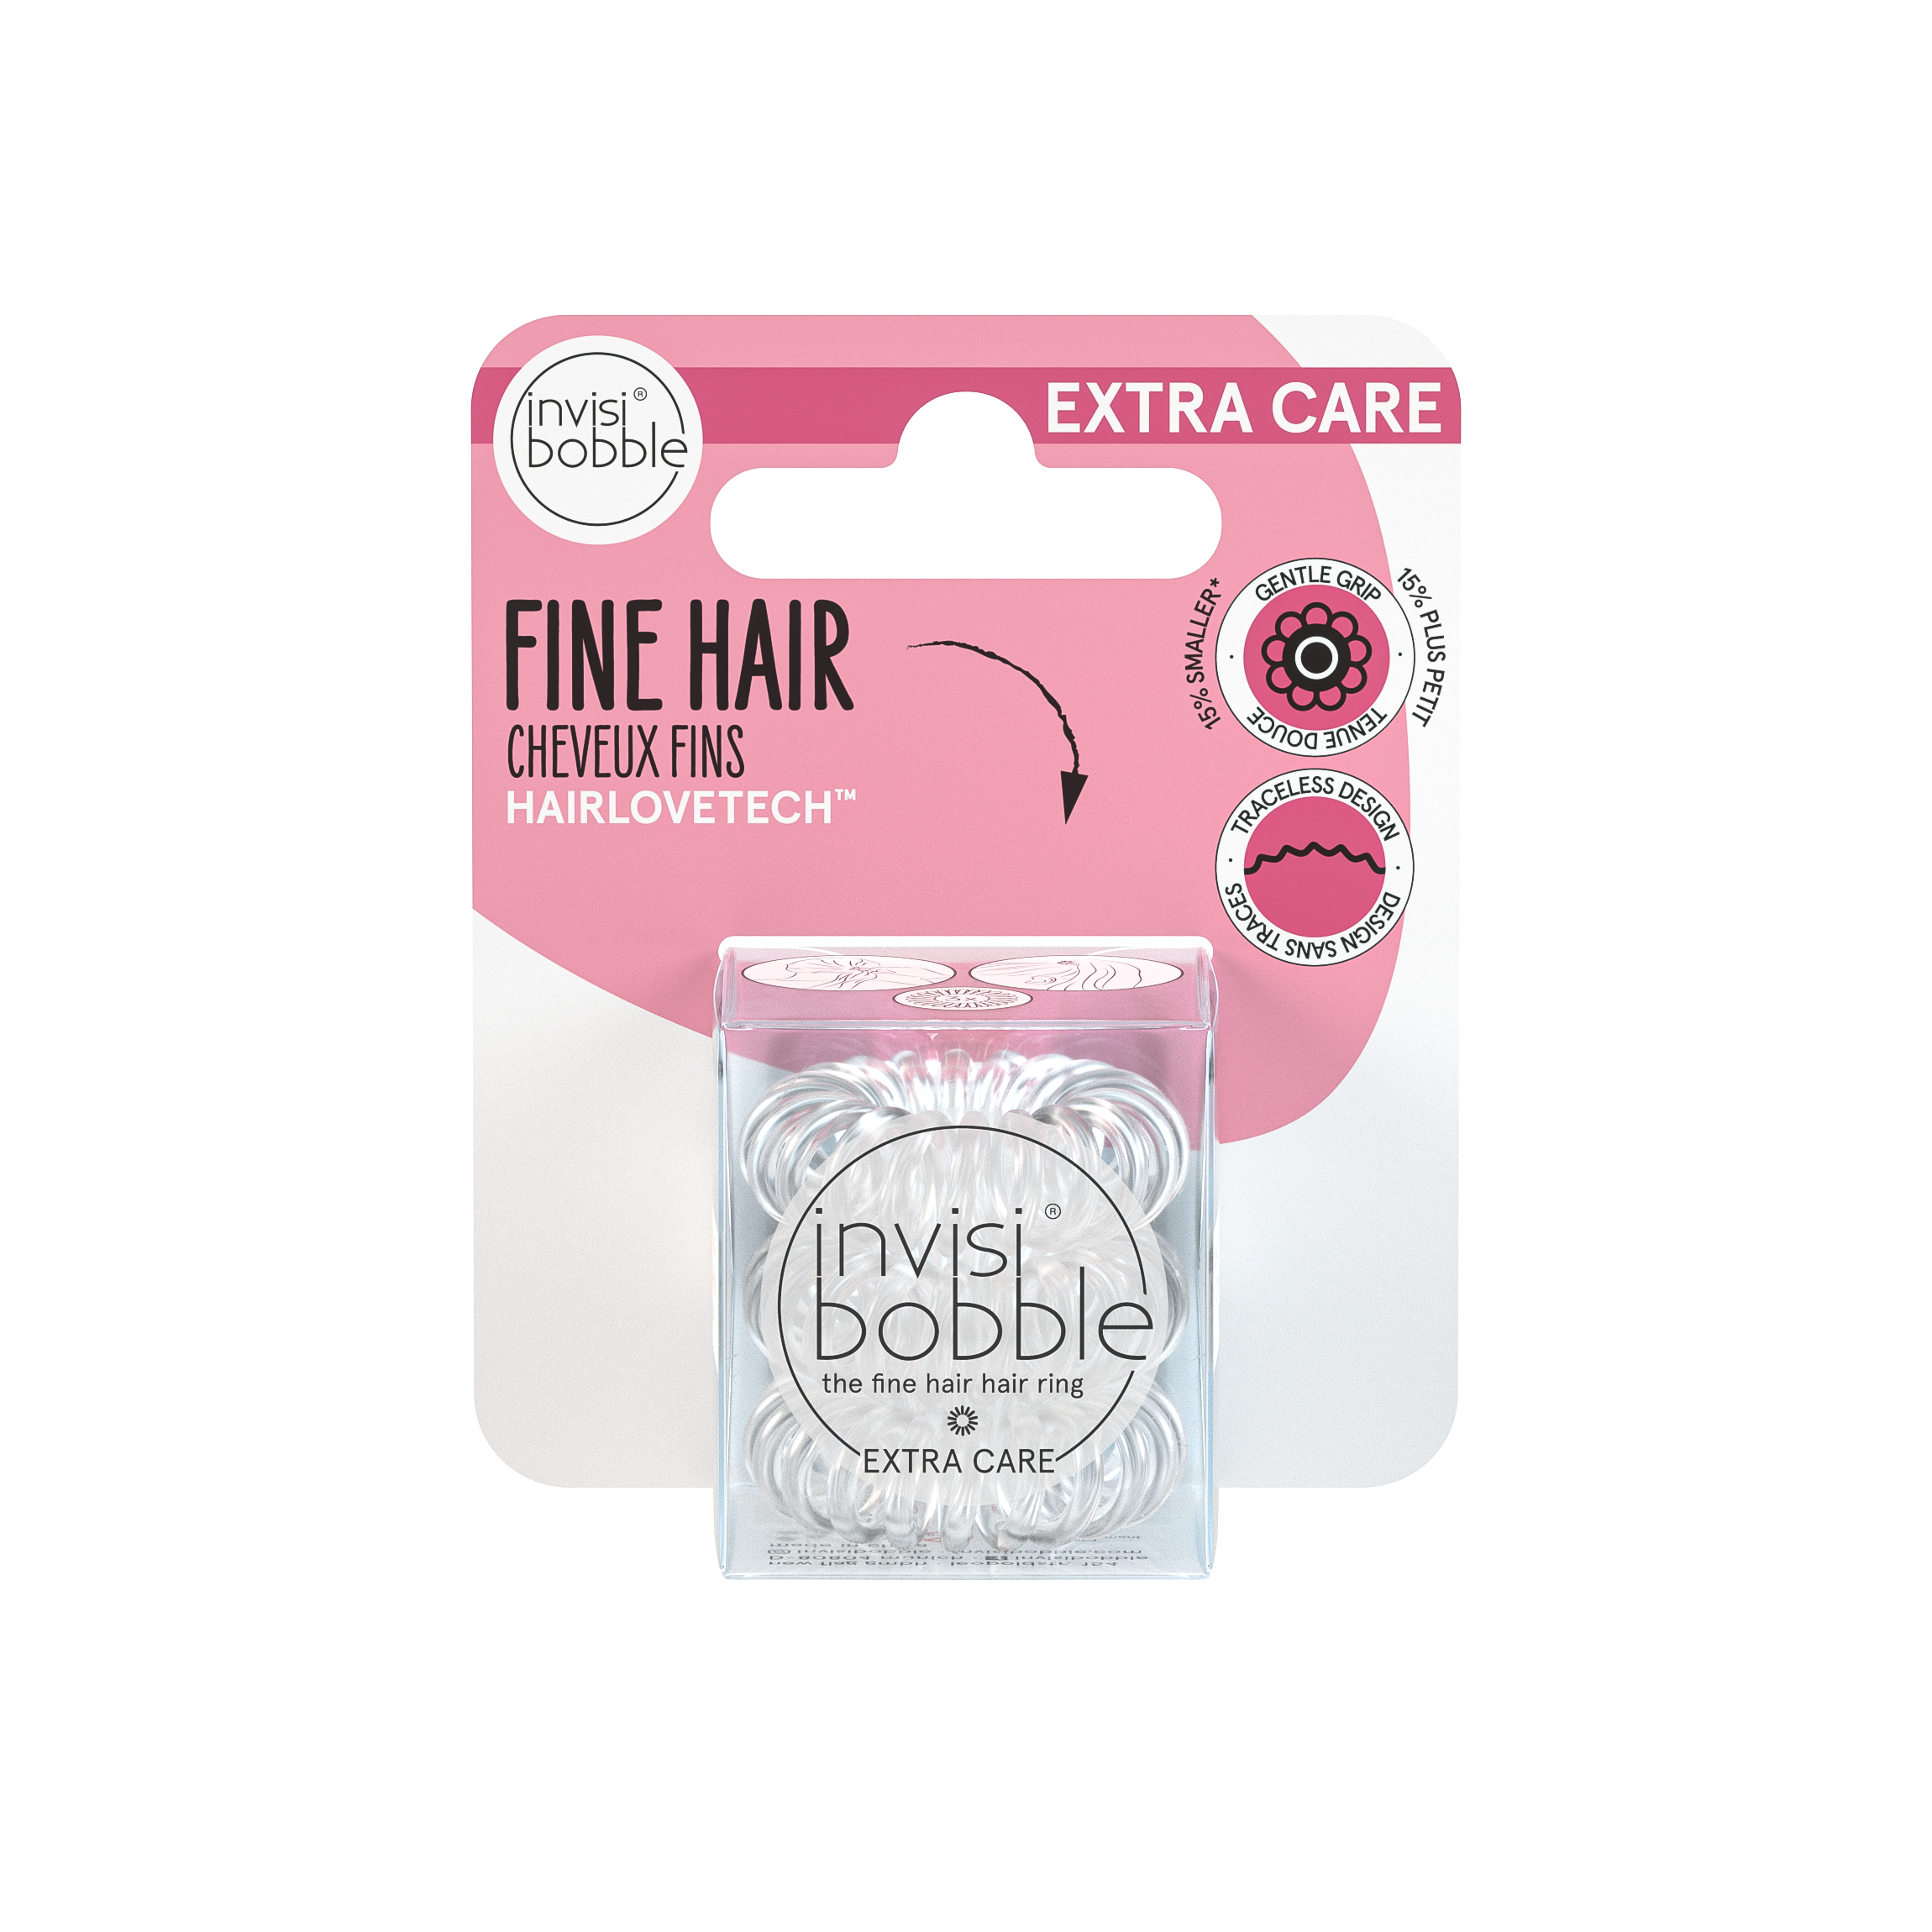 invisibobble® EXTRA HOLD Crystal Clear